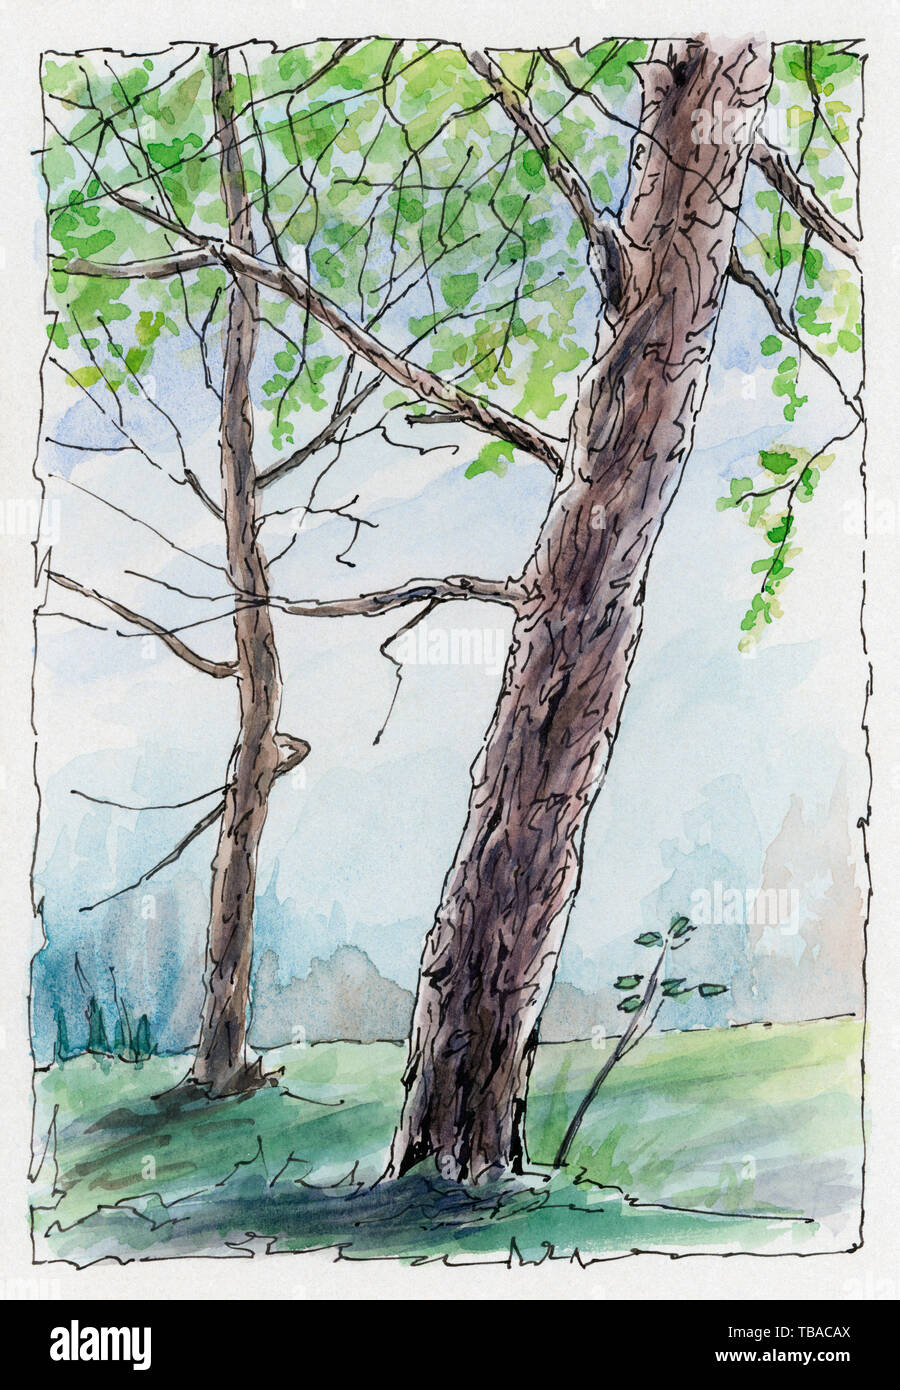 Two trees. Ink and watercolor on cardboard. Stock Photo